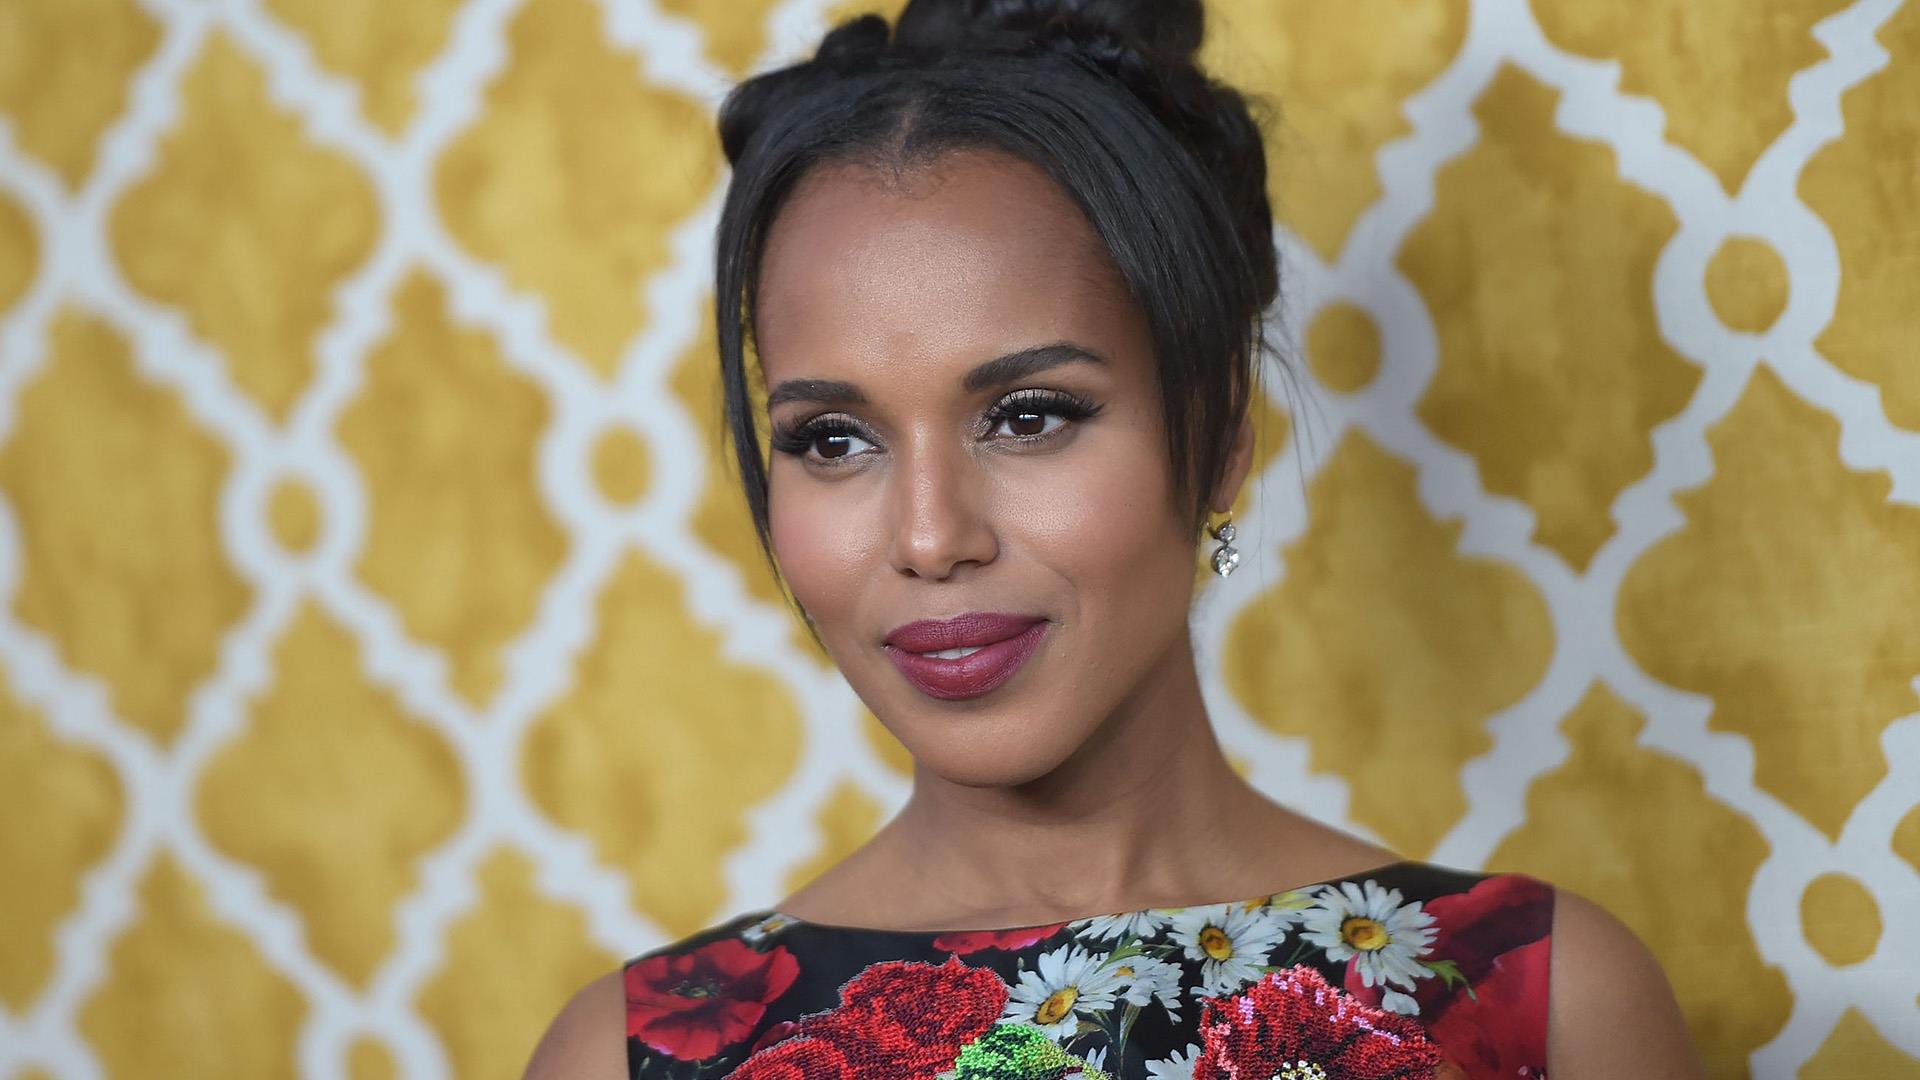 Kerry Washington gives Sheinelle props for her 'Scandal' moment